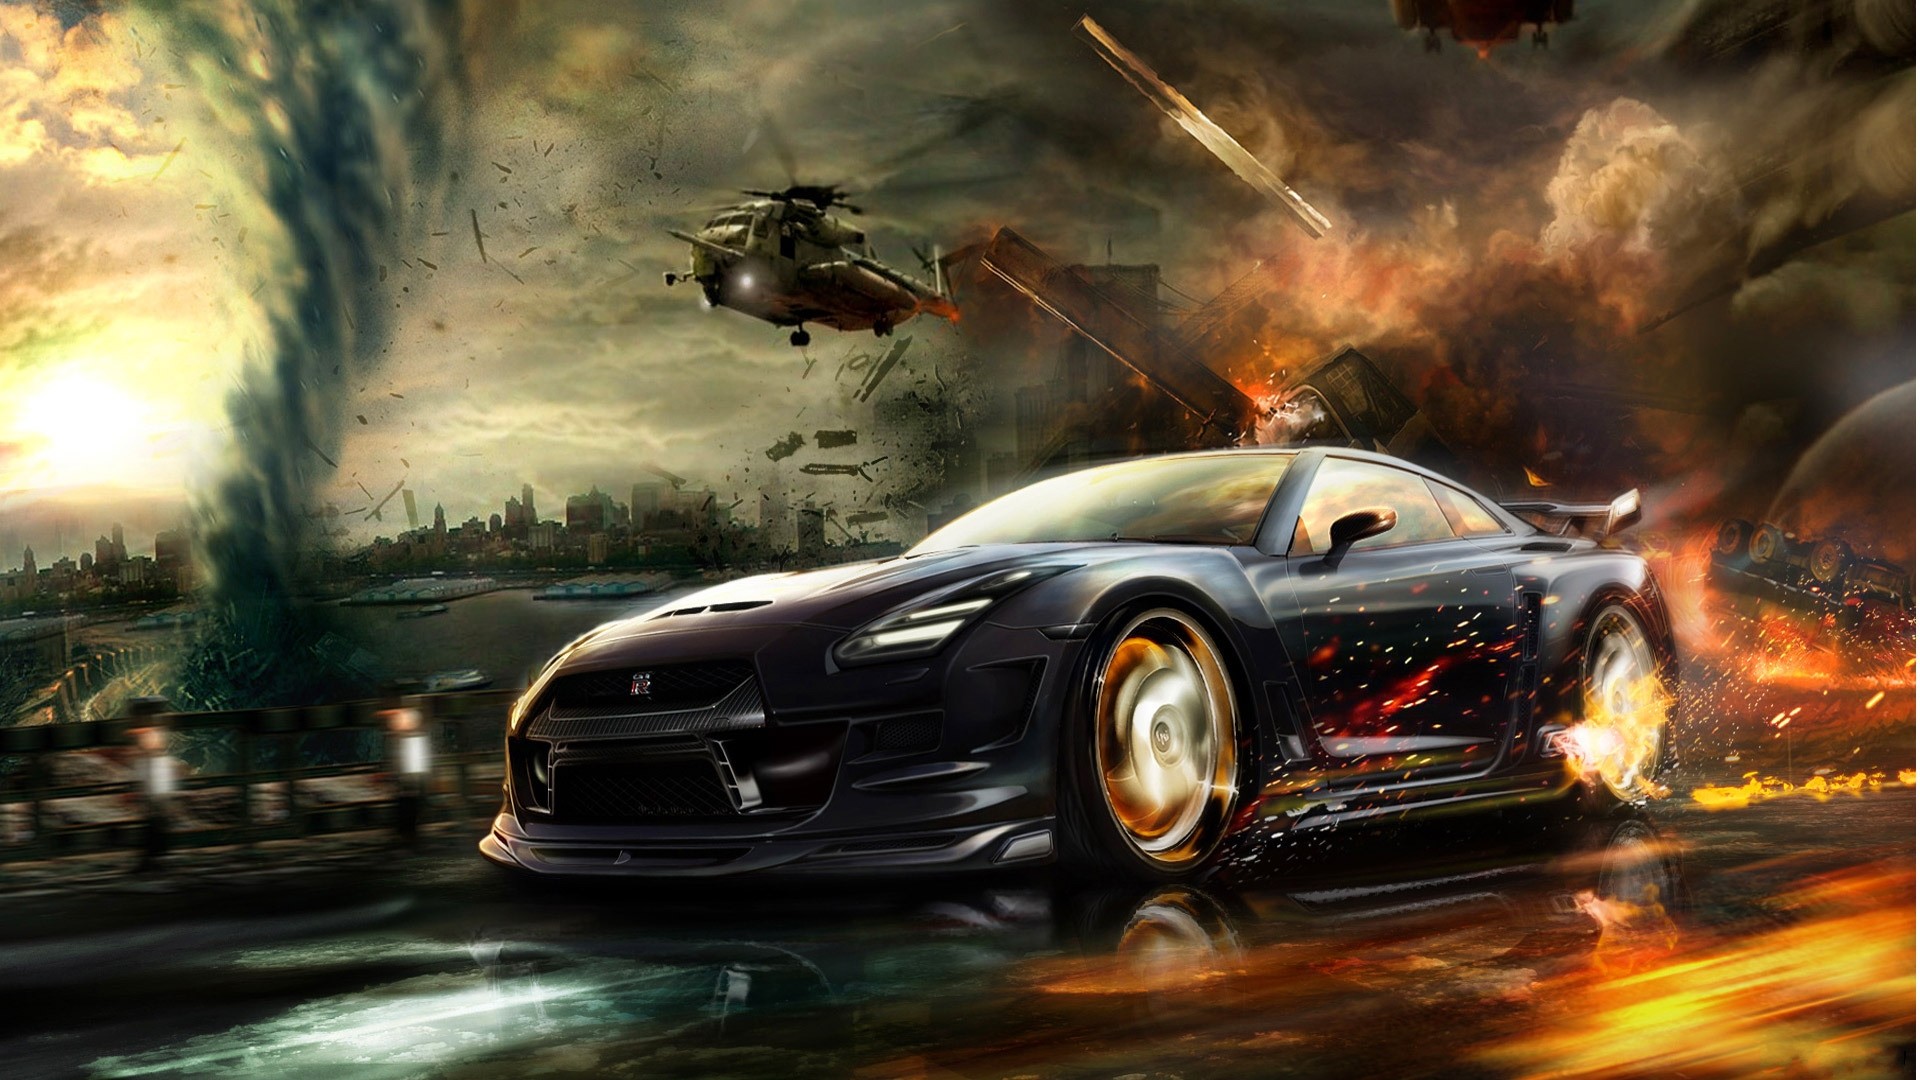 1920x1080 ... latest hd wallpapers hd backgrounds pic ...